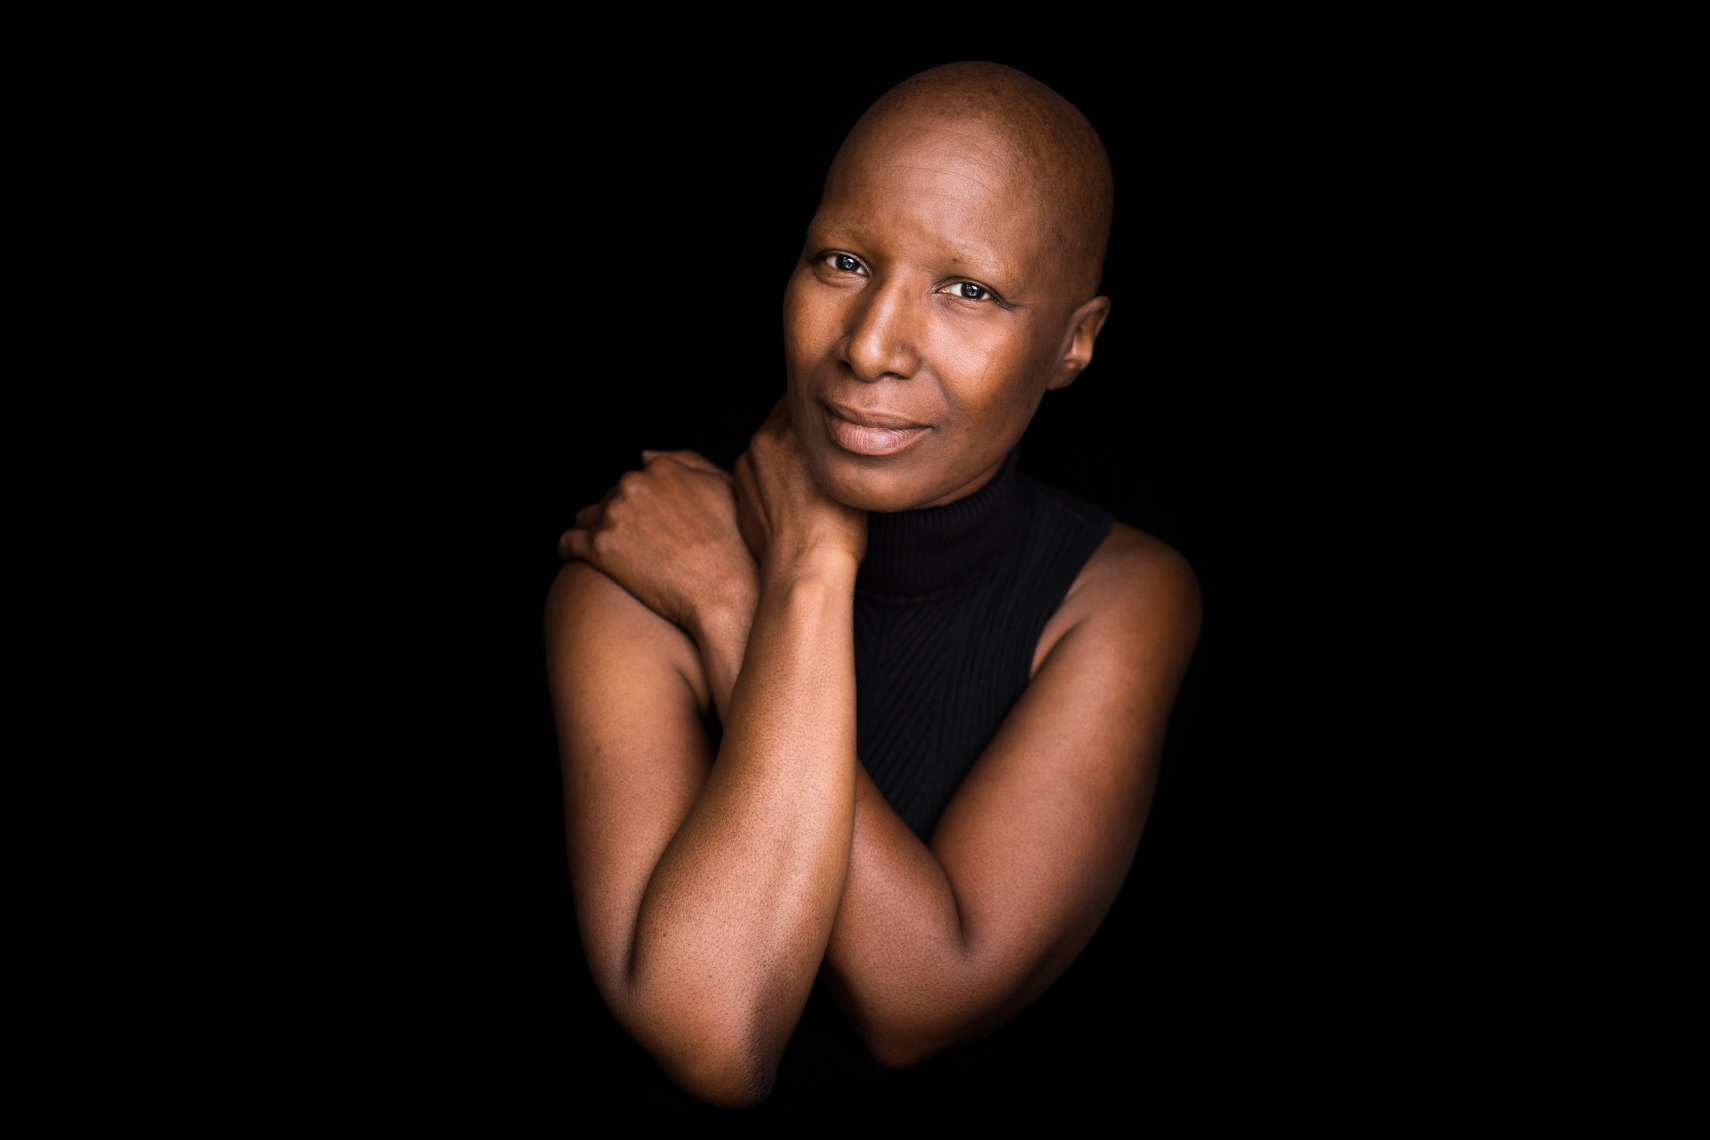 Facing Chemo is a photographic project for the Facing Light Foundation photographed by health and wellness photographer Robert Houser 